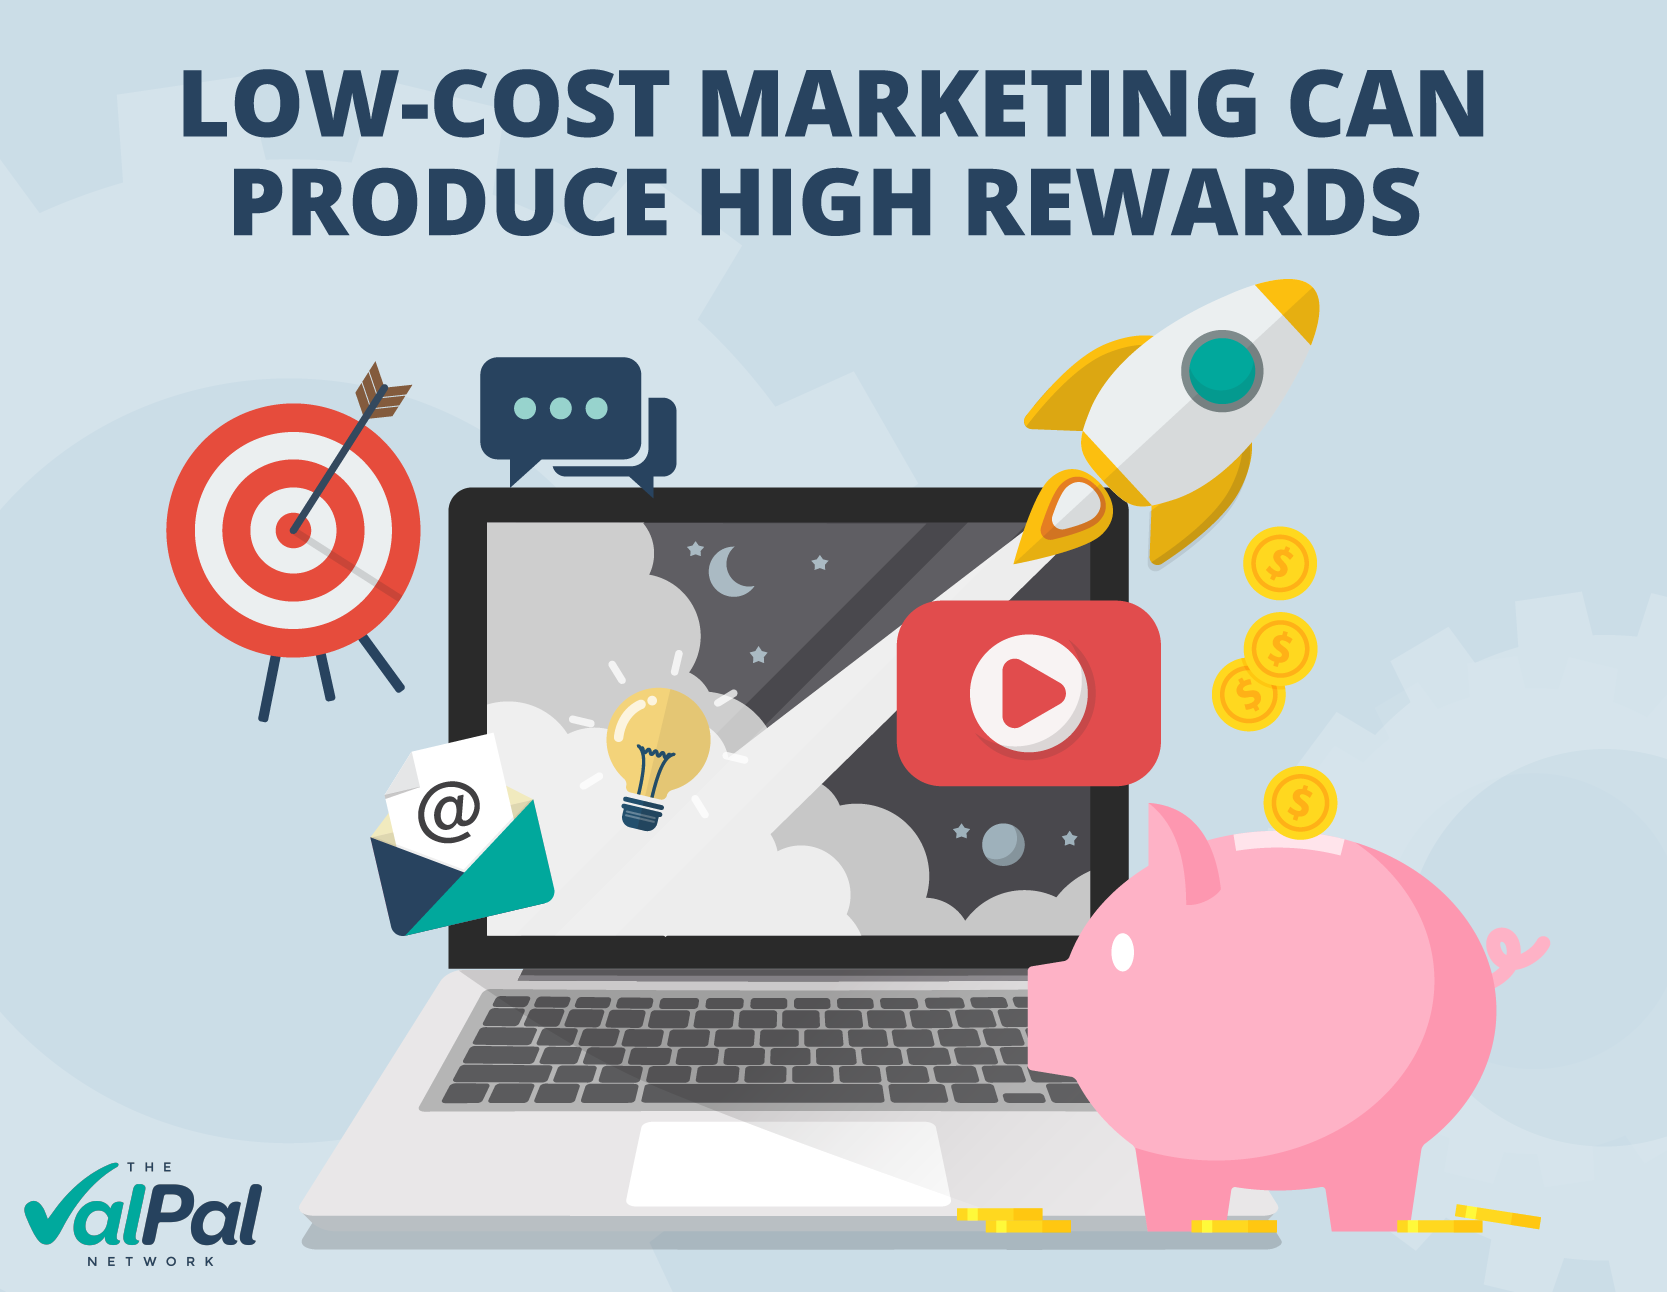 Low-cost marketing can produce high rewards